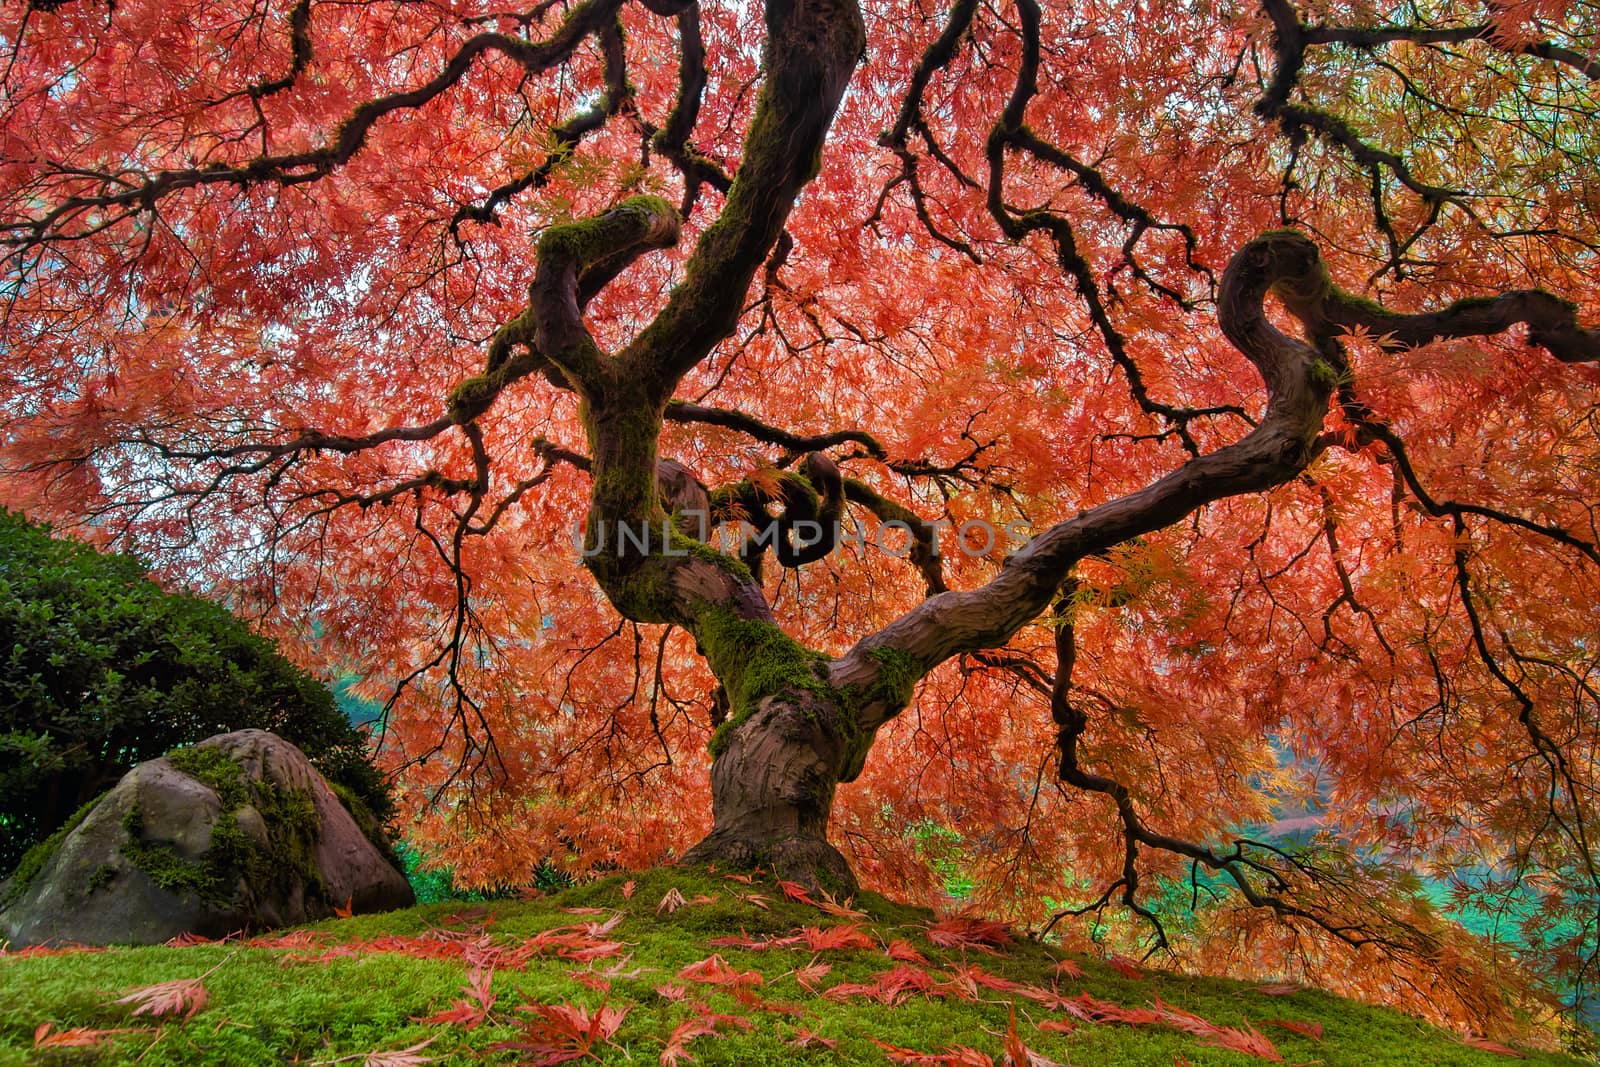 The Old Japanese Maple Tree at Portland Japanese Garden in its full Autumn Glory